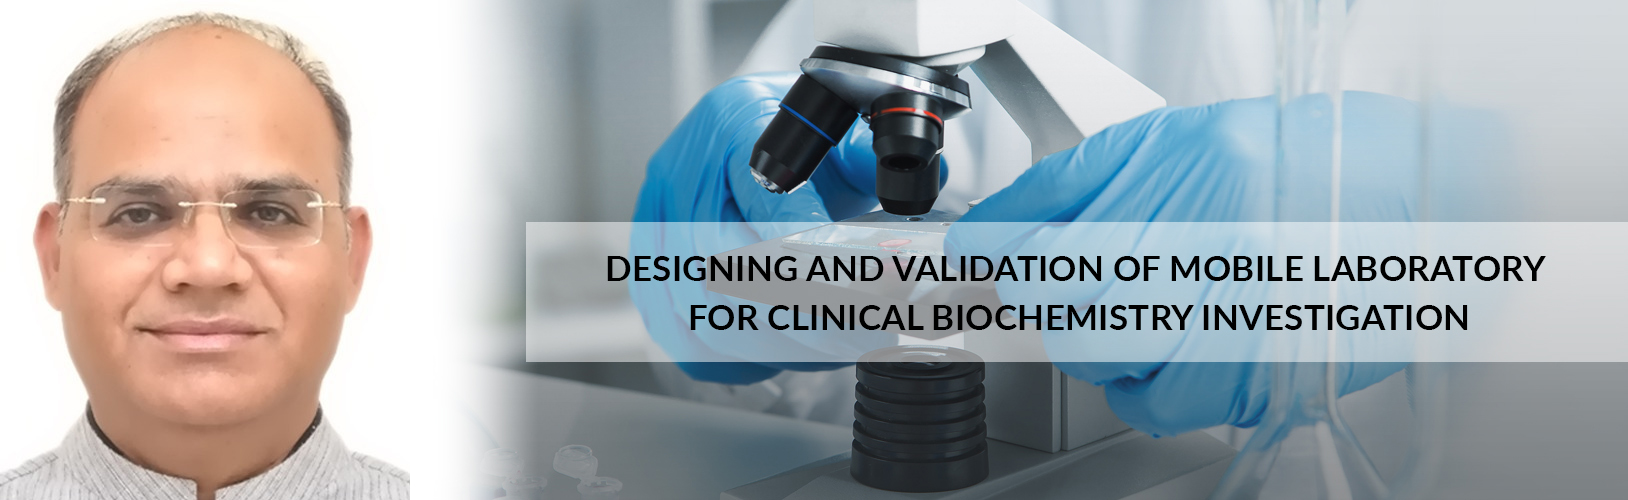 Designing and validation of Mobile Laboratory for Clinical Biochemistry Investigation